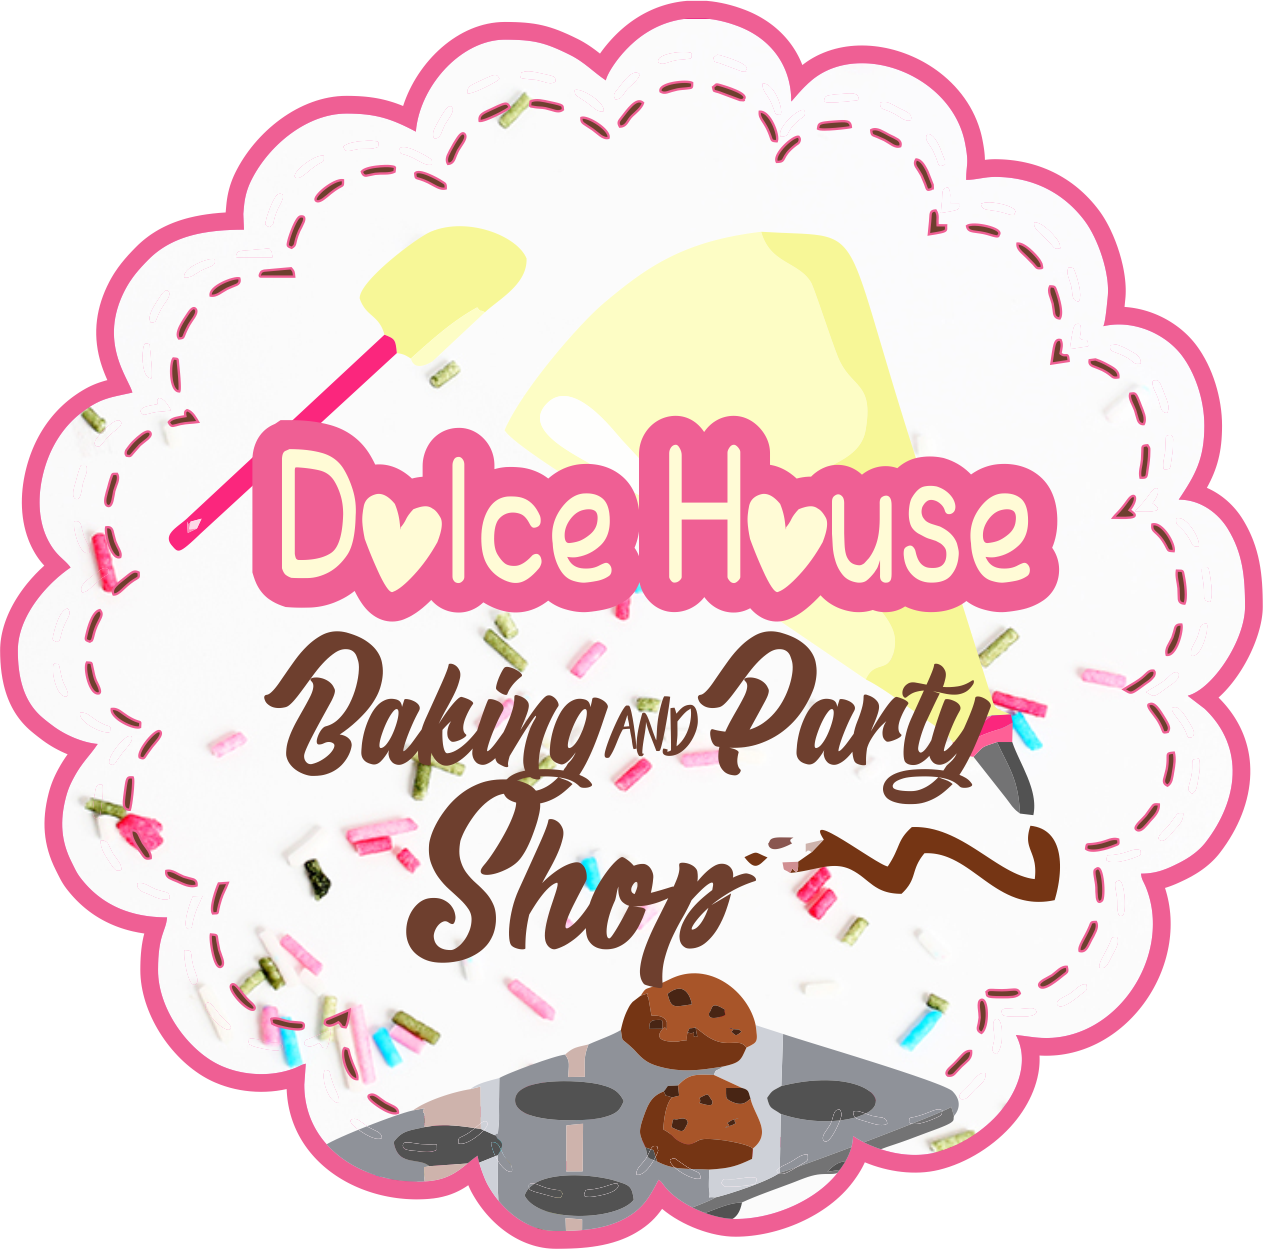 Dolce House